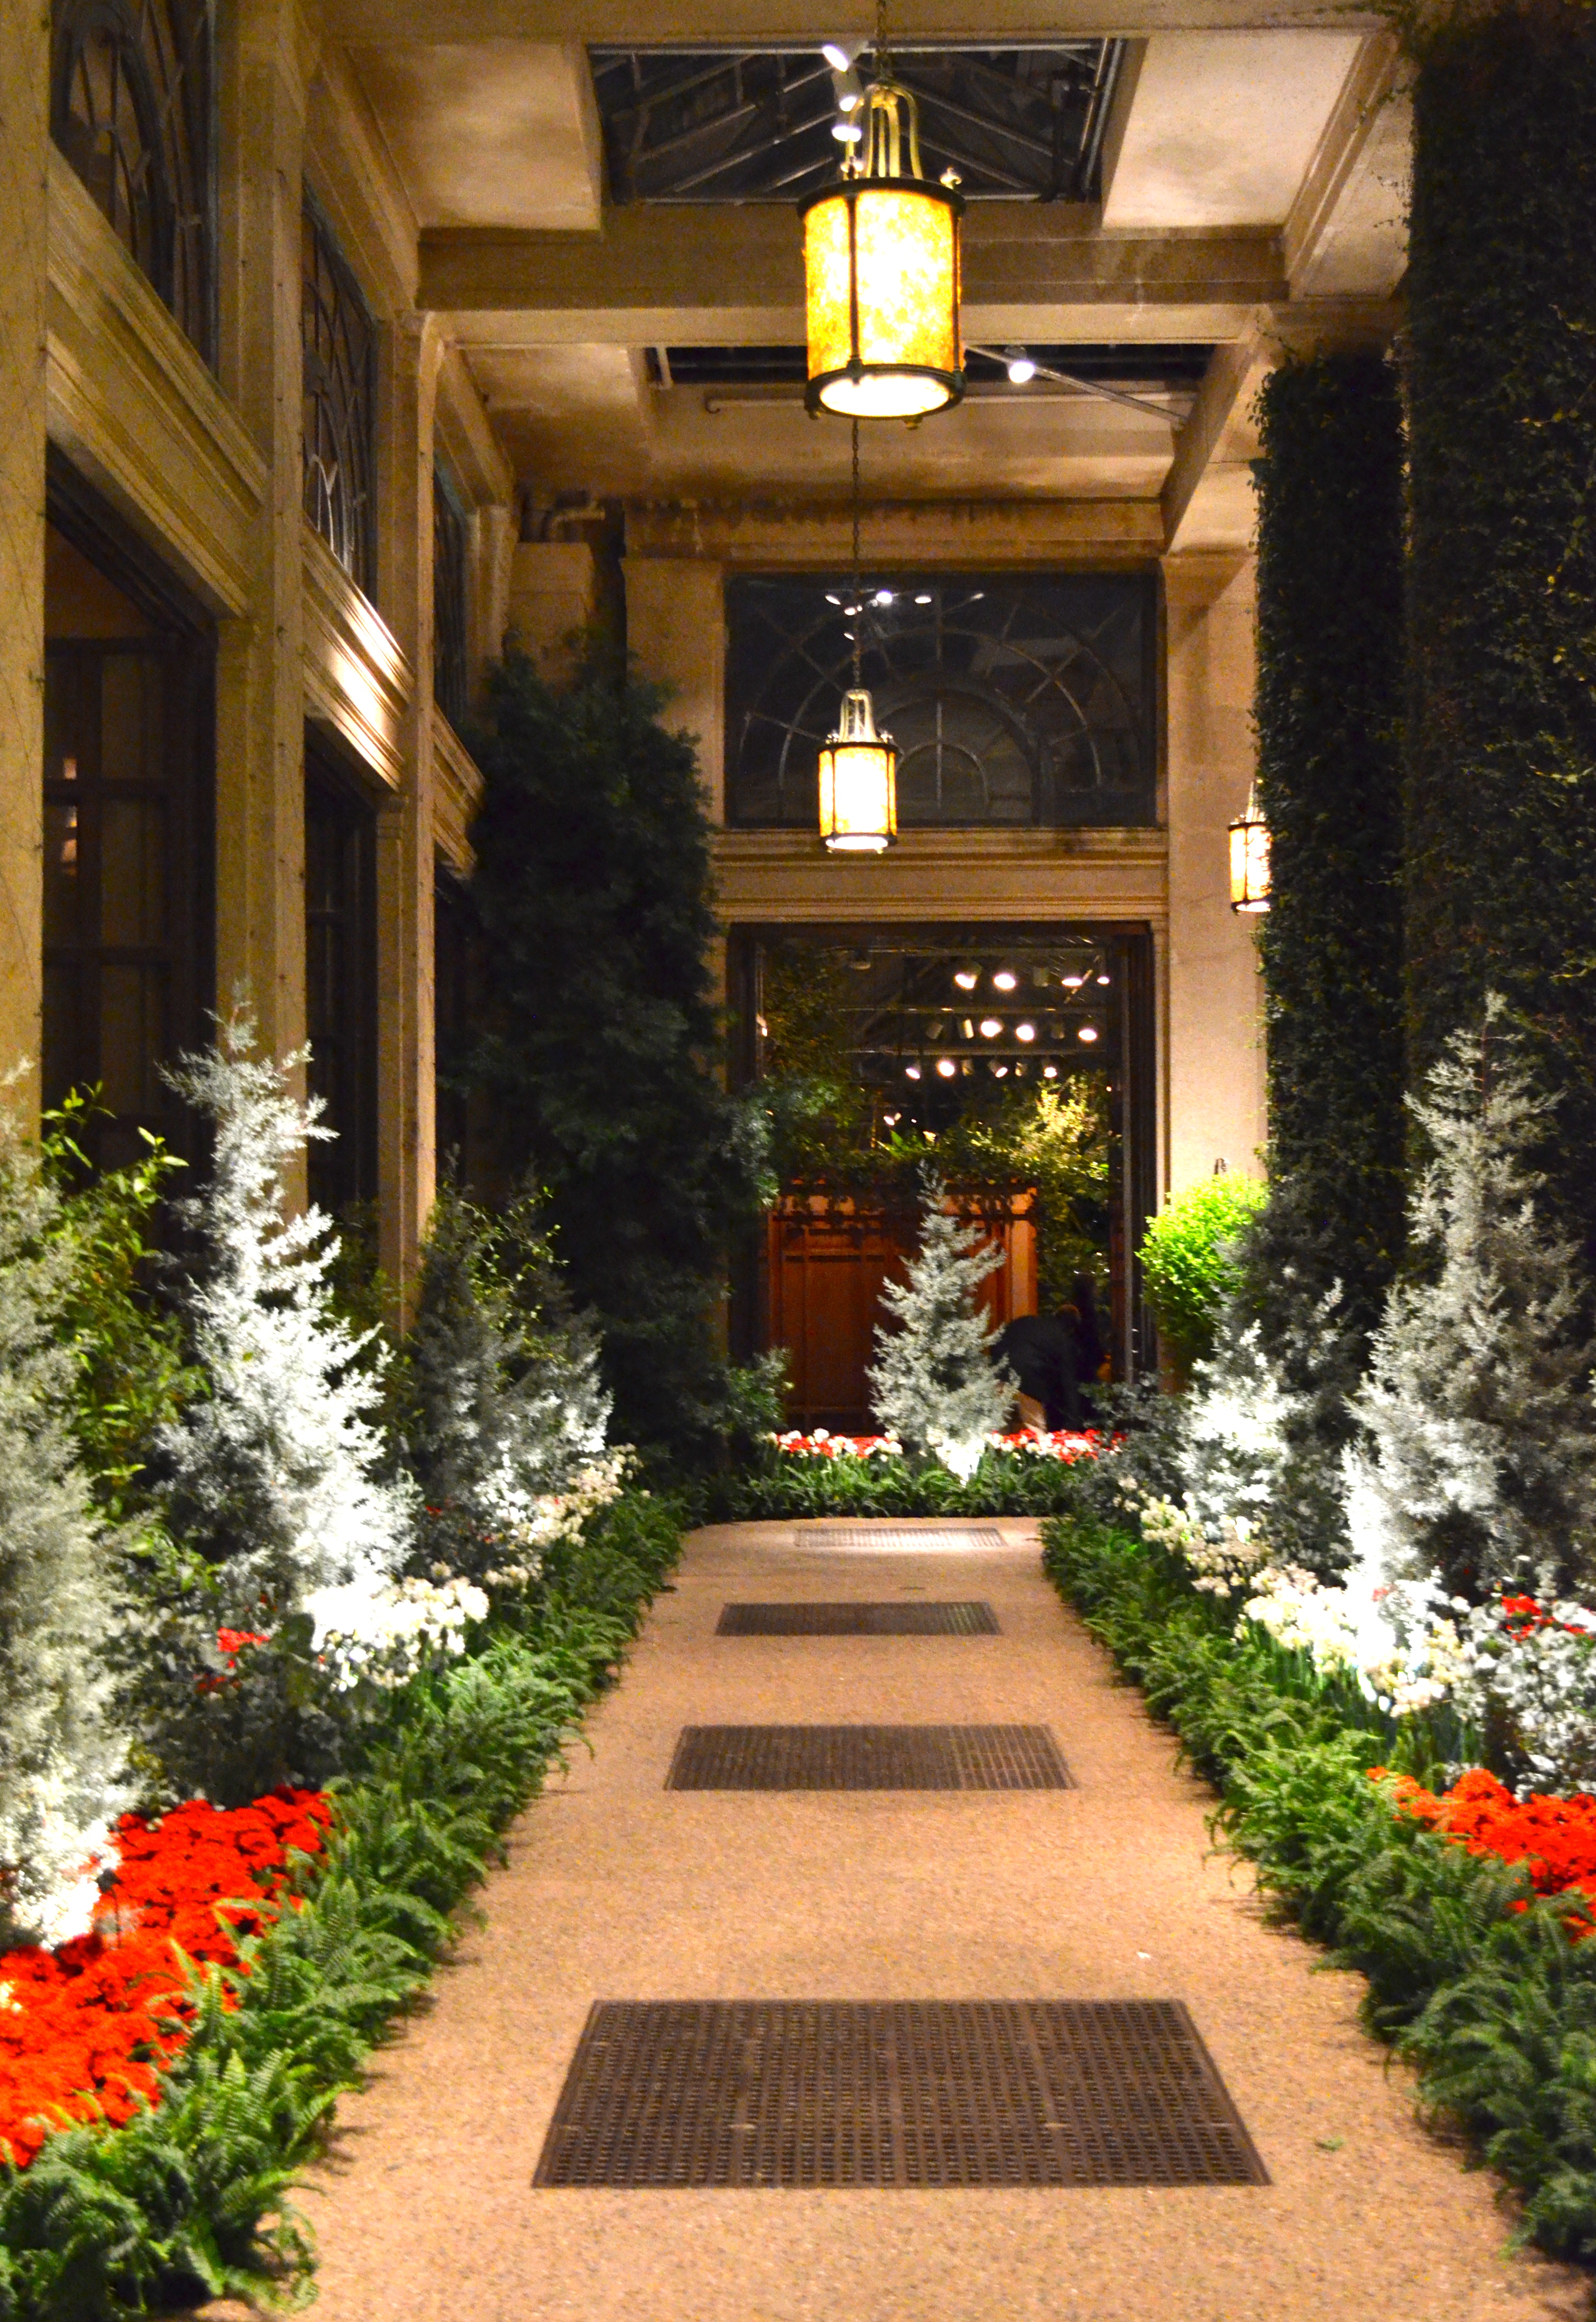 THE MAGNIFICENT LONGWOOD GARDENS AT CHRISTMAS